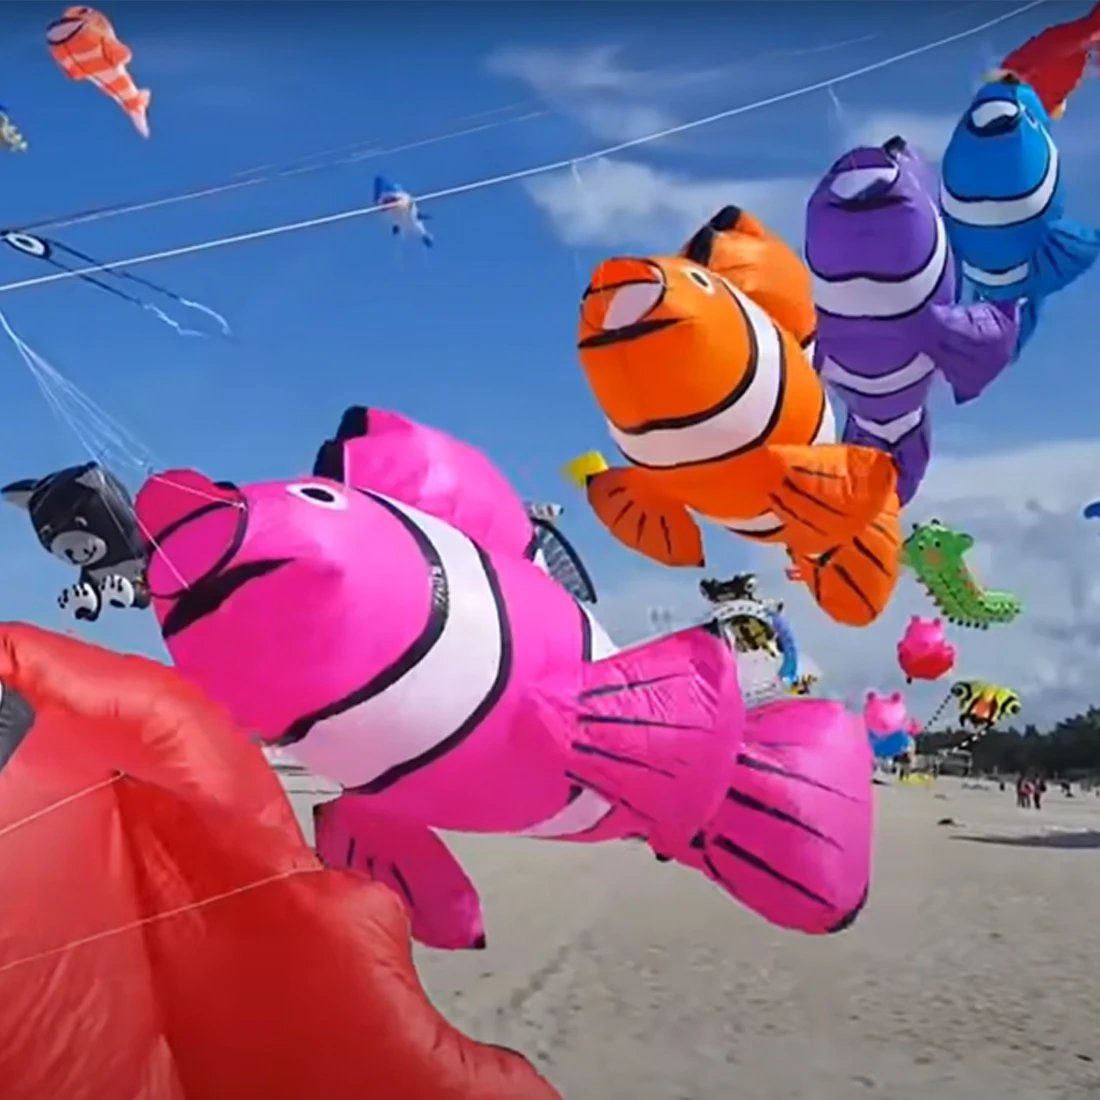 9KM 2.45m~3m Fish Kite Soft Inflatable Line Laundry Kite 30D Ripstop Nylon with Bag for Kite Festival (Accept wholesale)